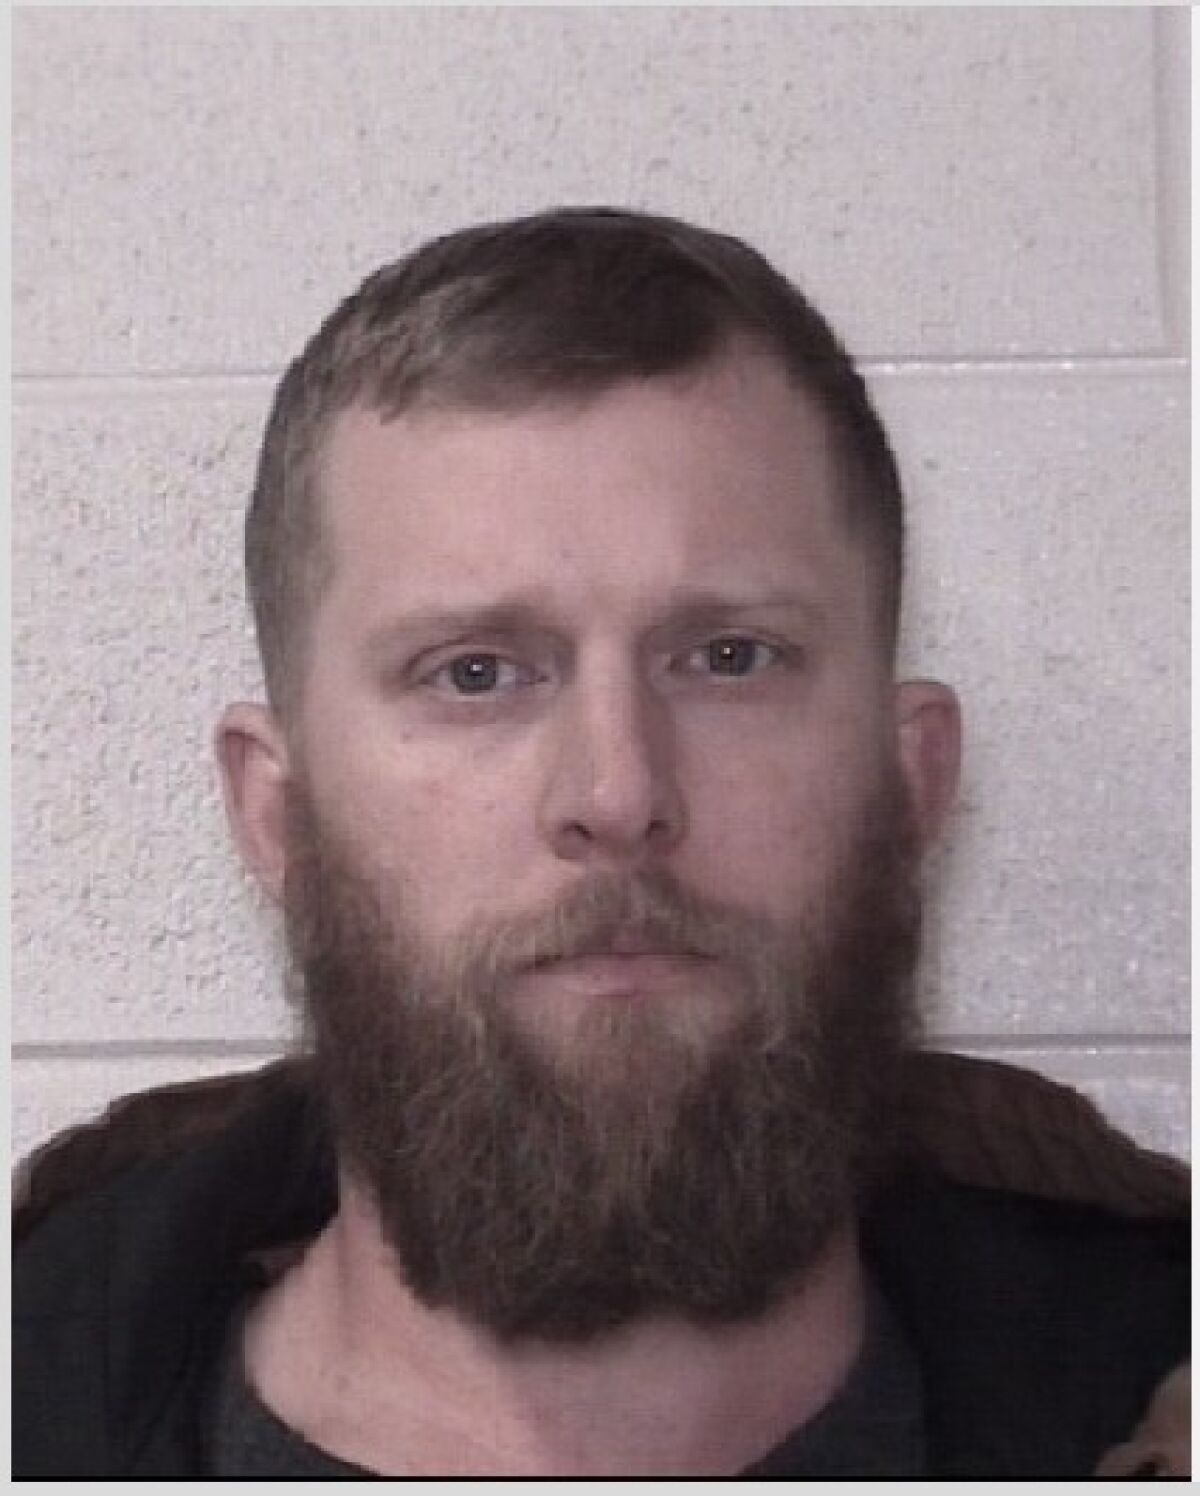 The mug shot of a bearded man with short brown hair